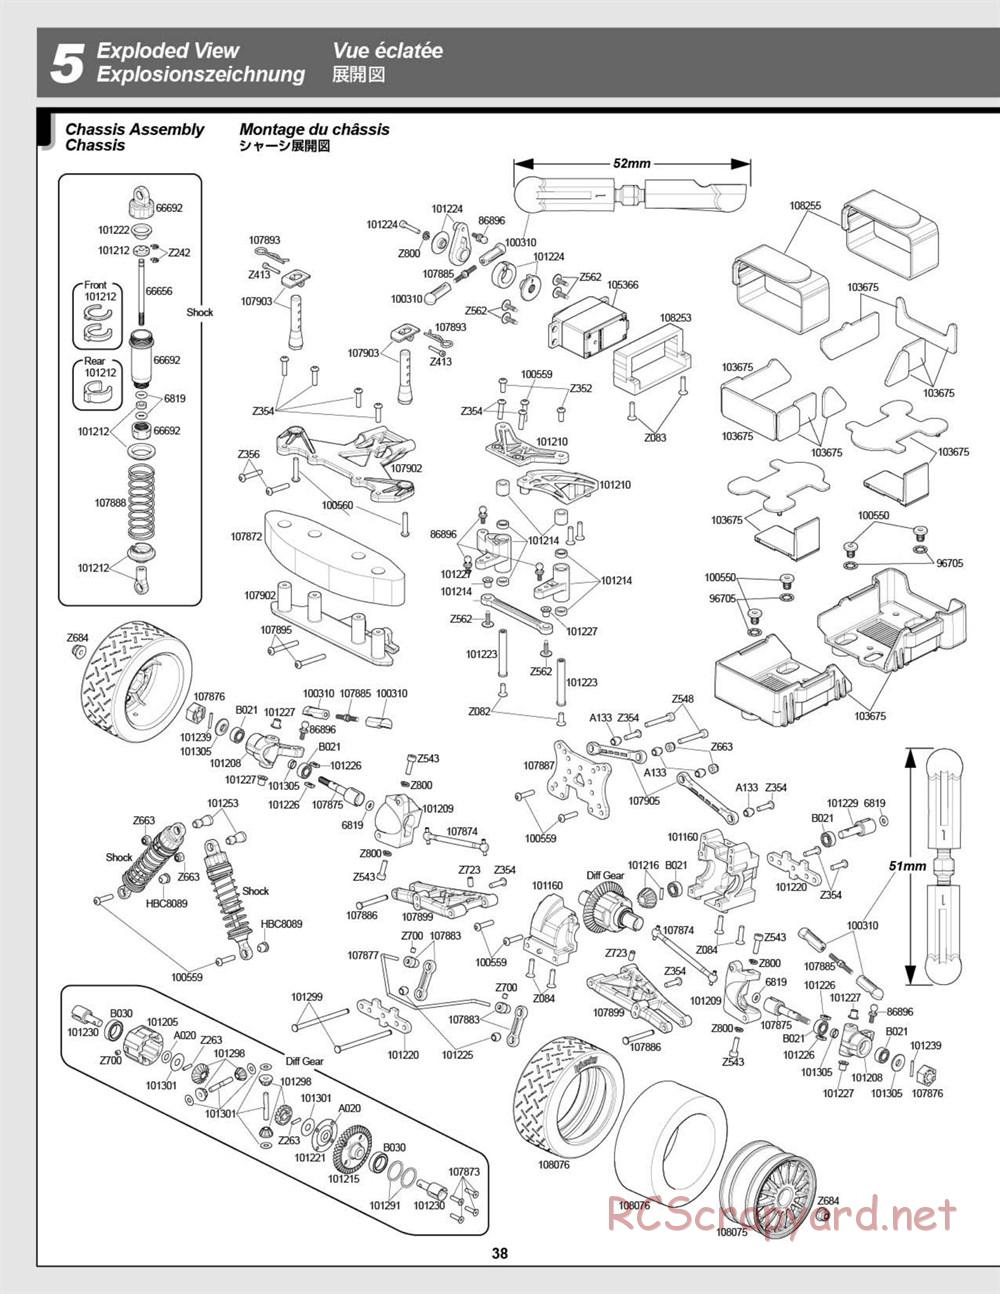 HPI - WR8 Flux - Exploded View - Page 38